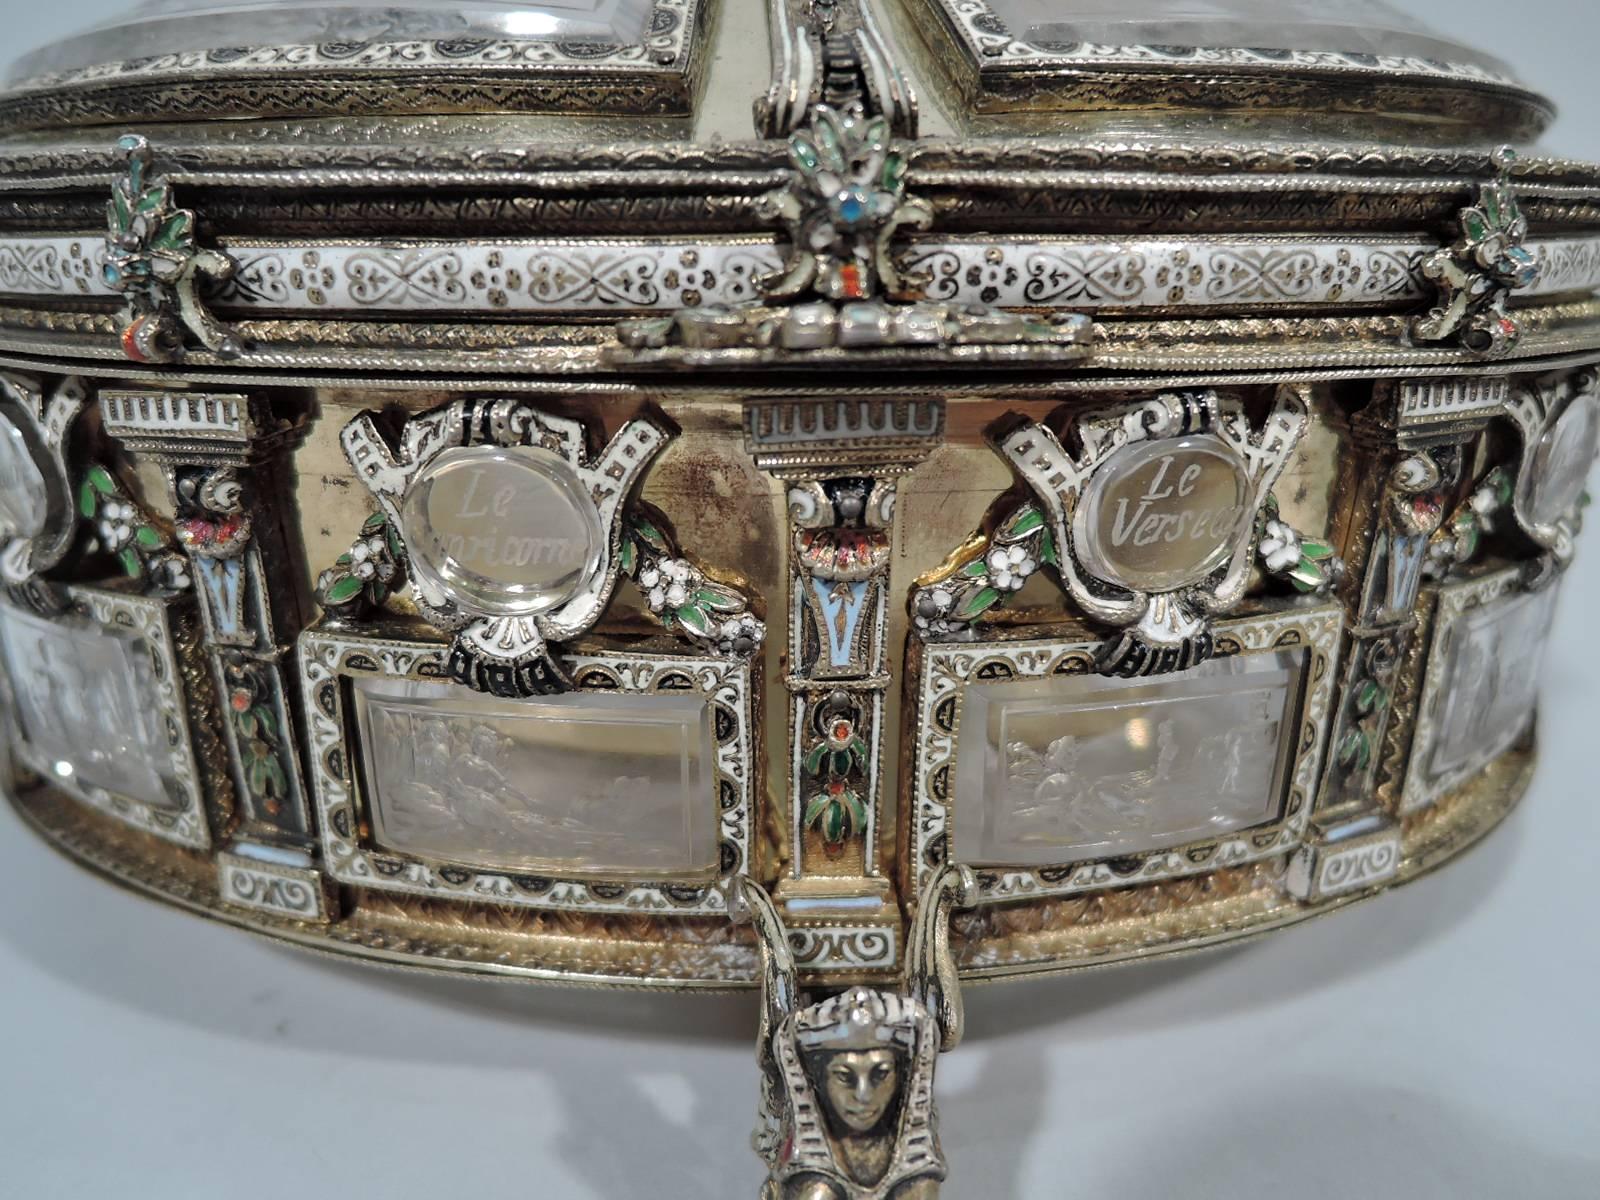 Austrian Antique Viennese Silver Gilt and Rock Crystal Casket with Astrological Symbols